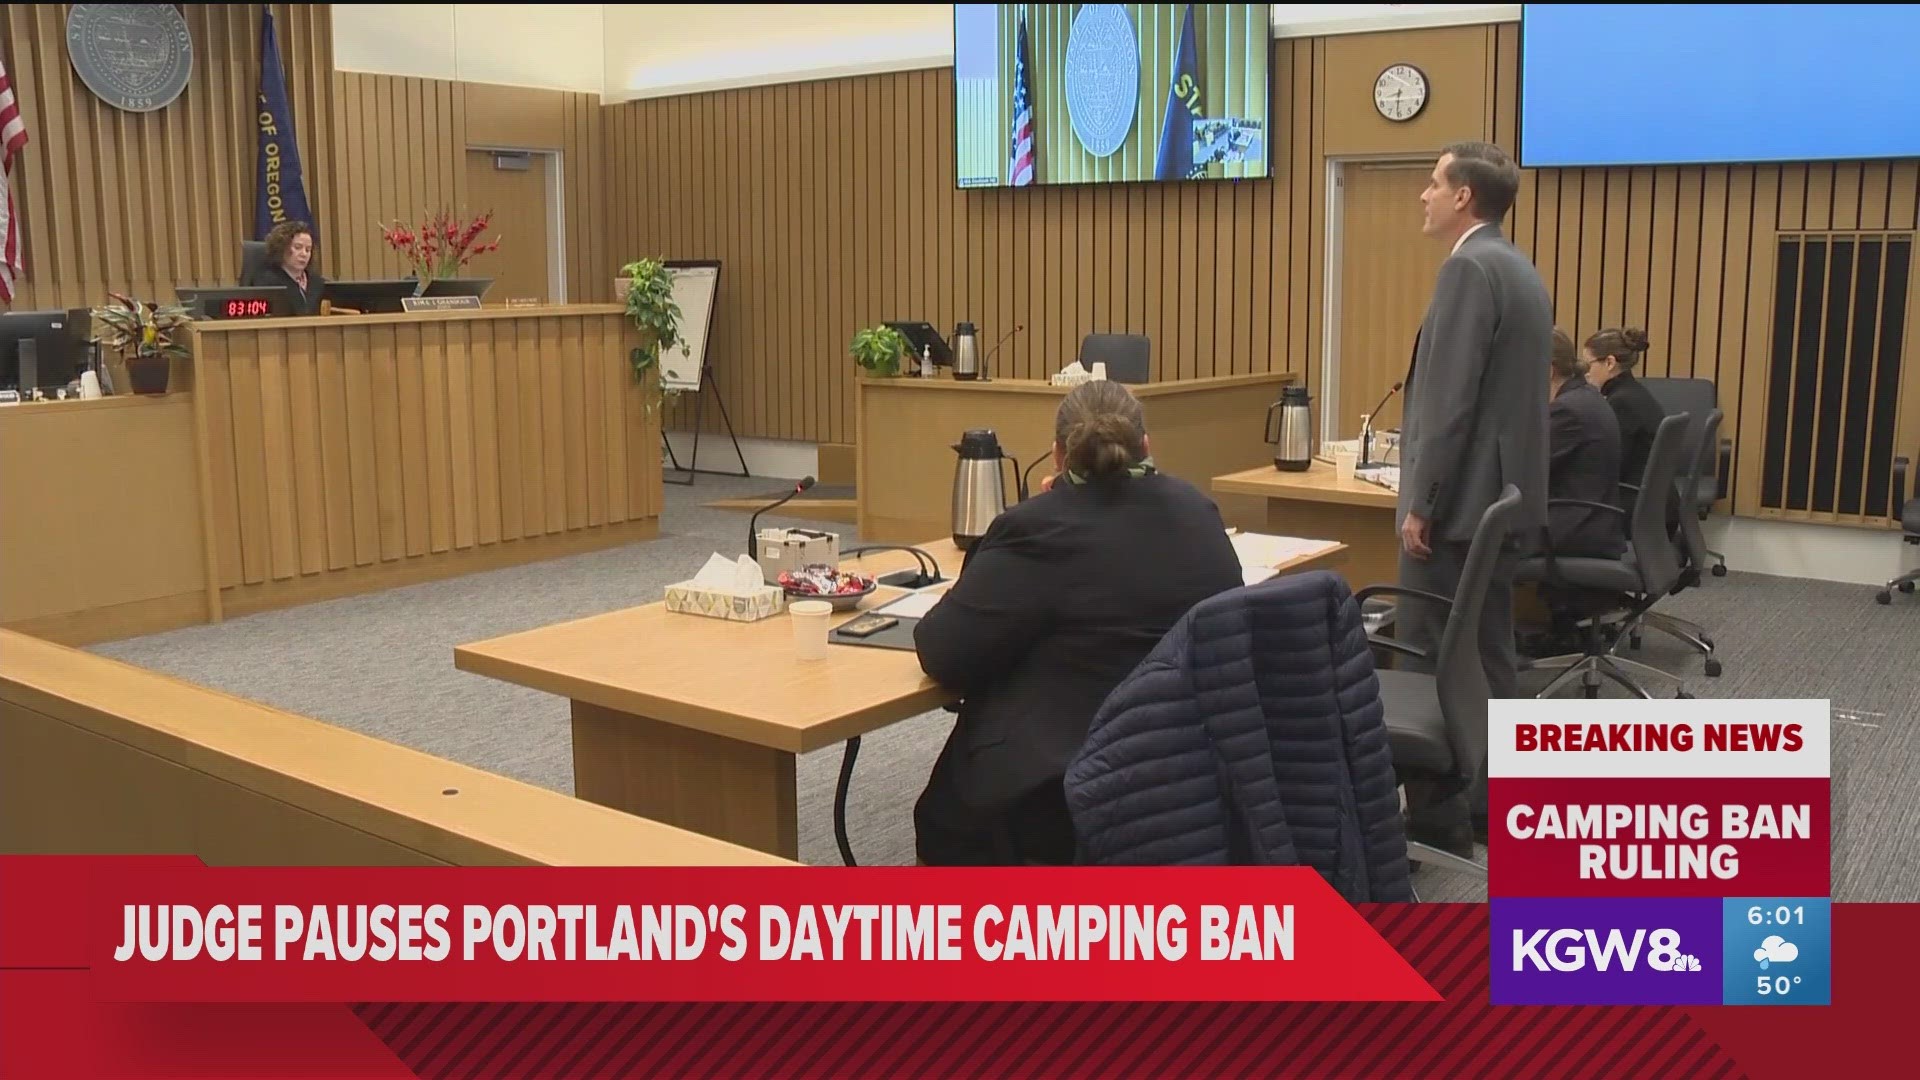 Homeless Portlanders filed a class action lawsuit against the city, arguing that Portland's camping ordinance violates state law and the Oregon Constitution.